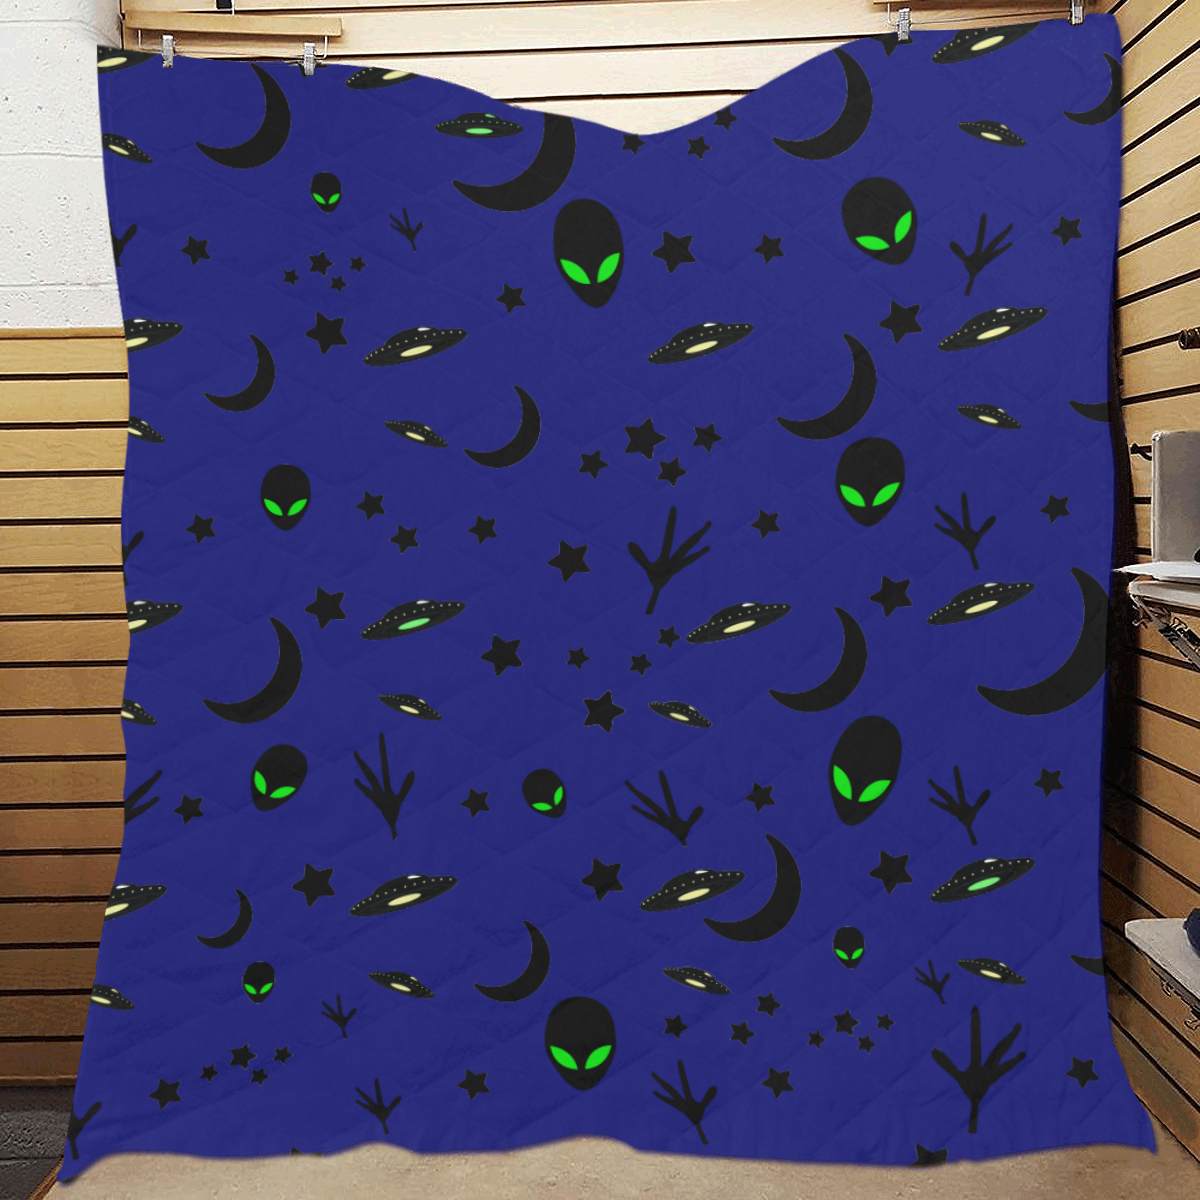 Alien Flying Saucers Stars Pattern Quilt 70"x80"